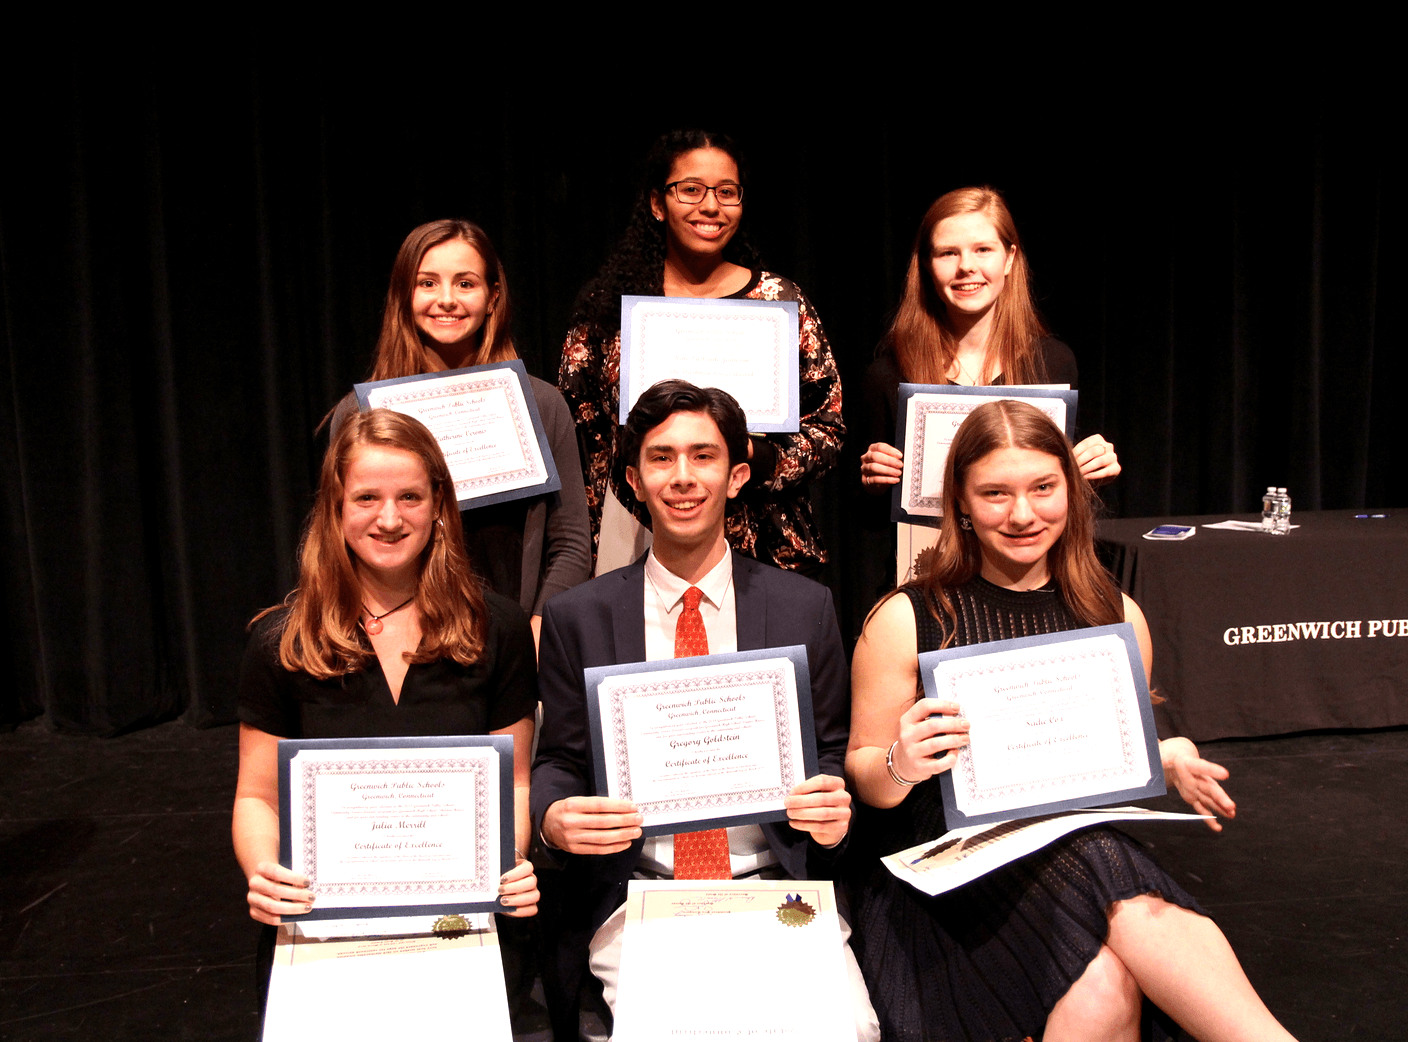 Greenwich High School community service award winners, clockwise from rear: Catherine Veronis from Folsom House, René Jameson (Fleishman Service Award), Flora Dievenich Braes from Bella House, Sadie Cox from Clark House, Greg Goldstein from Cantor House and Julia Merrill from Sheldon House. March 13, 2018 Photo: Leslie Yager